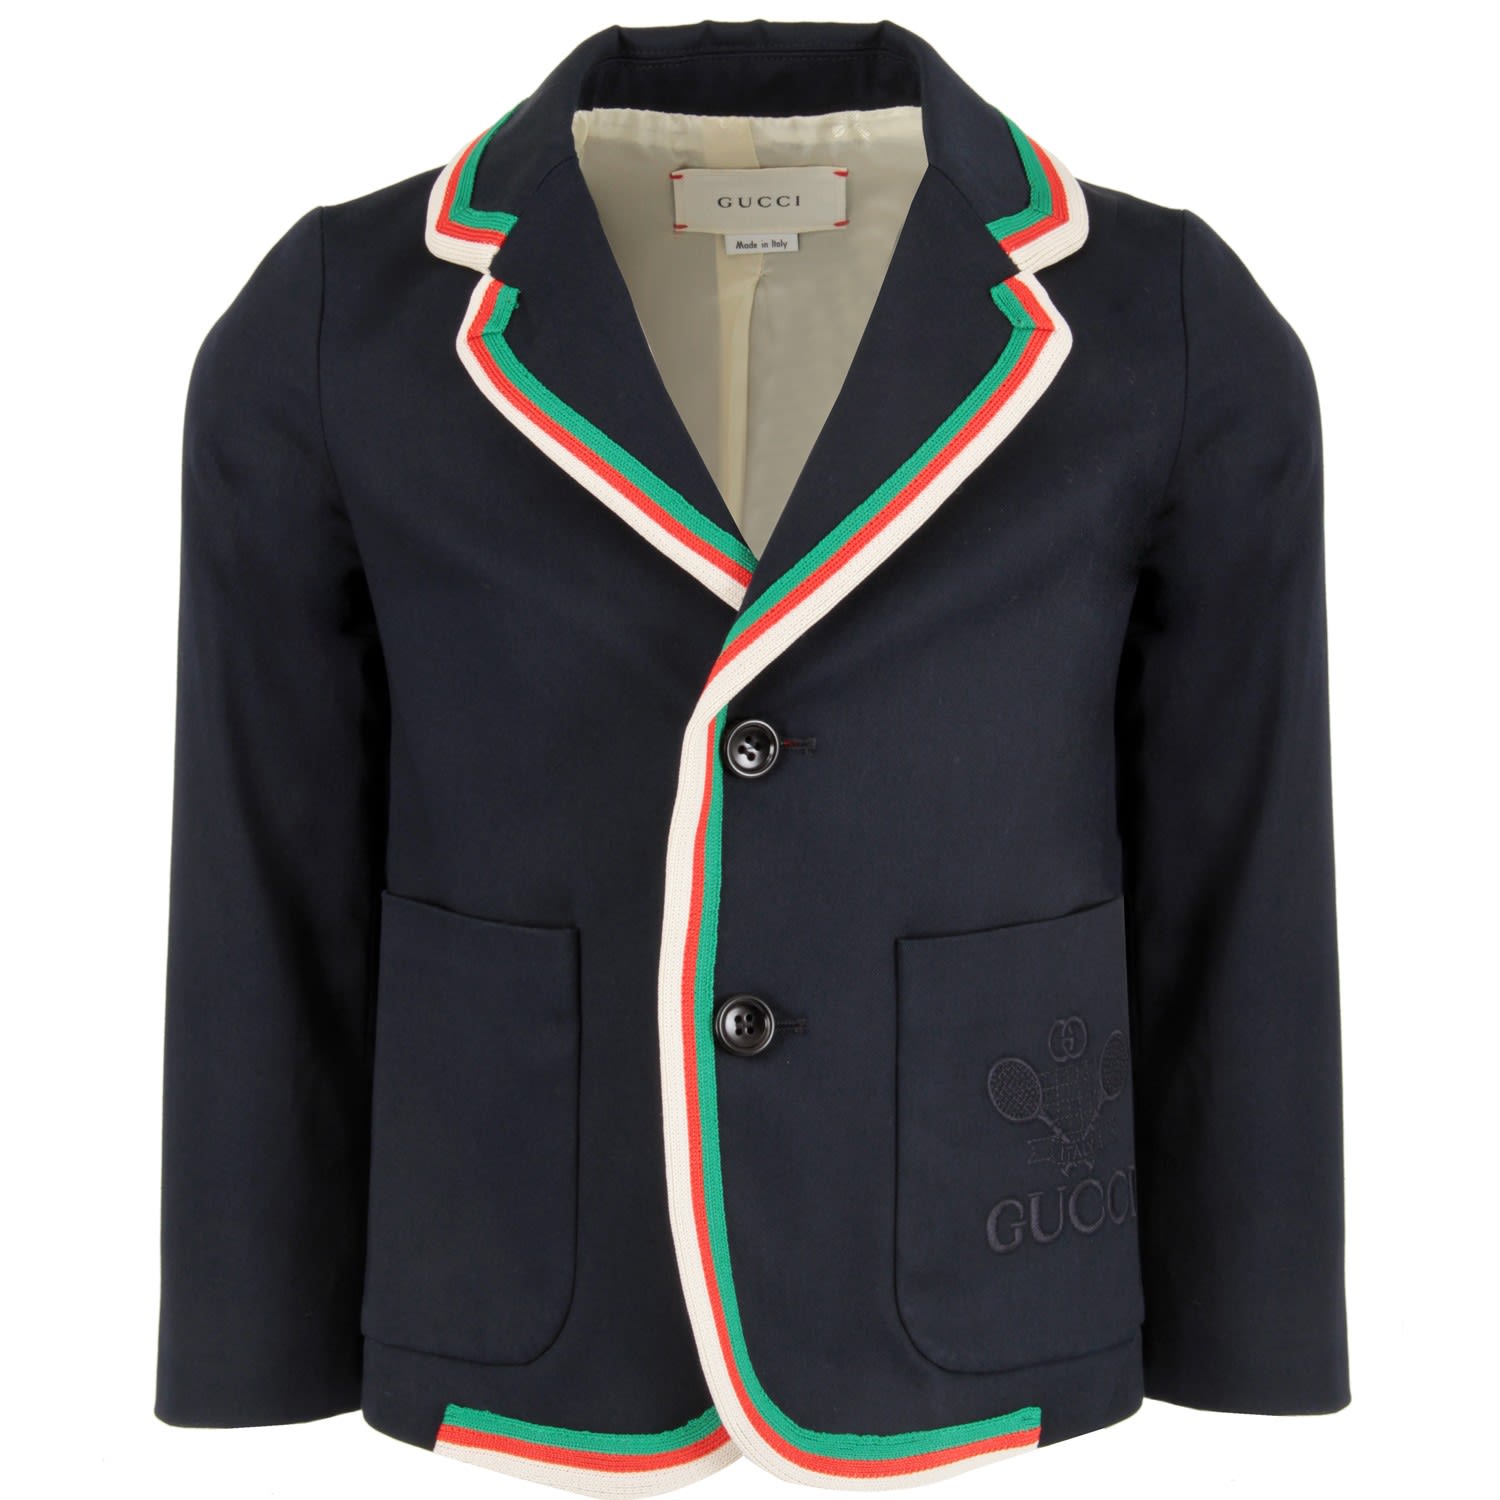 GUCCI BLUE JACKET FOR BOY WITH DOUBLE GG,591560 XWAG5 4265